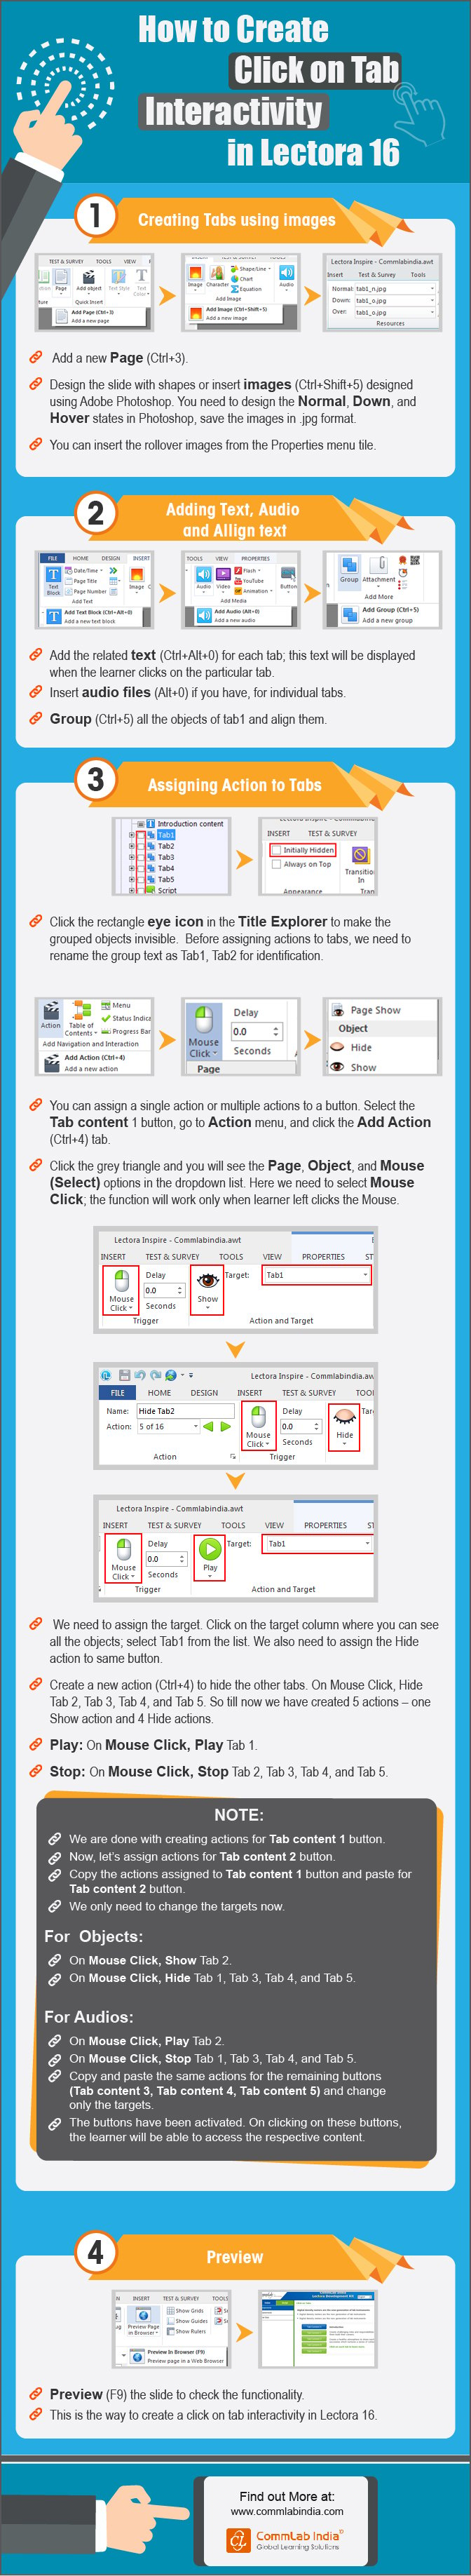 How to Create Click On Tabs Interactivity in Lectora 16 [Infographic]